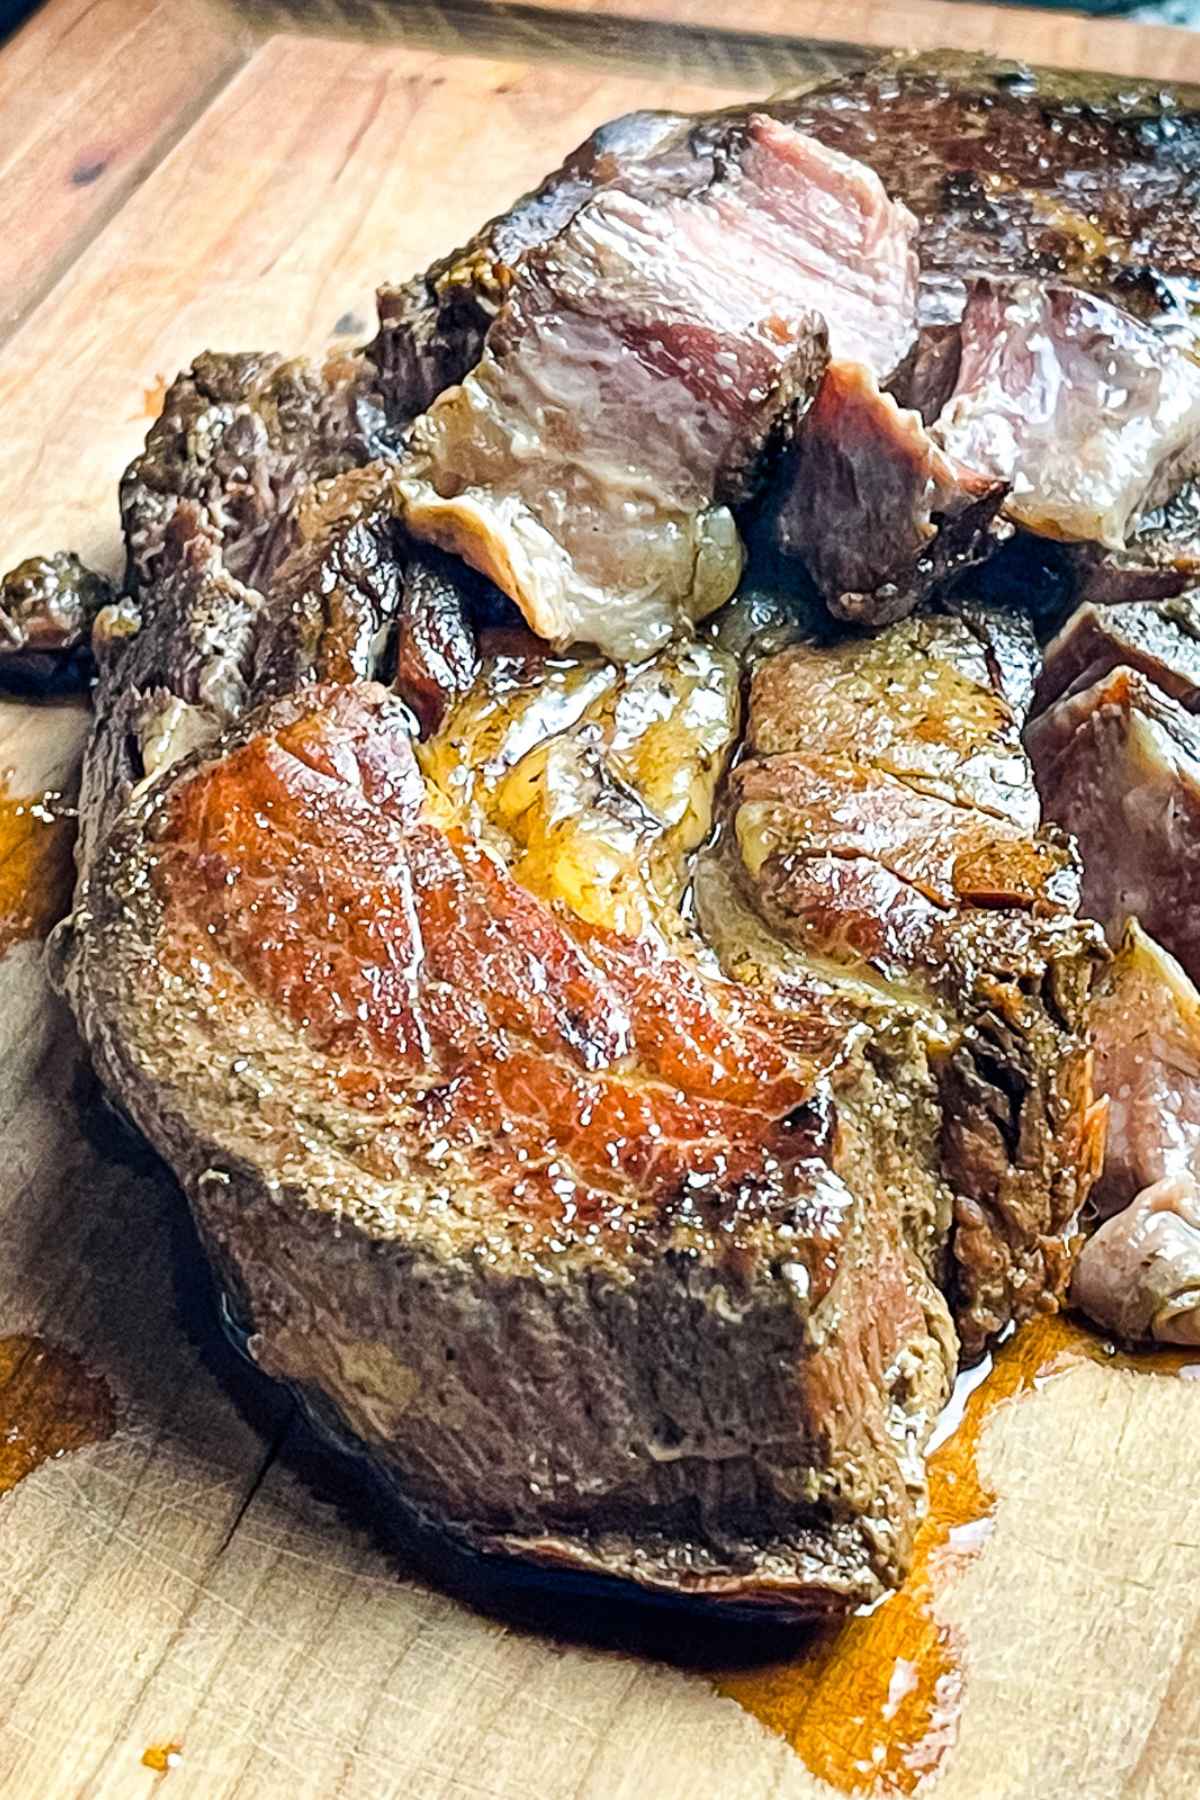 Cooked chuck roast on cutting board.